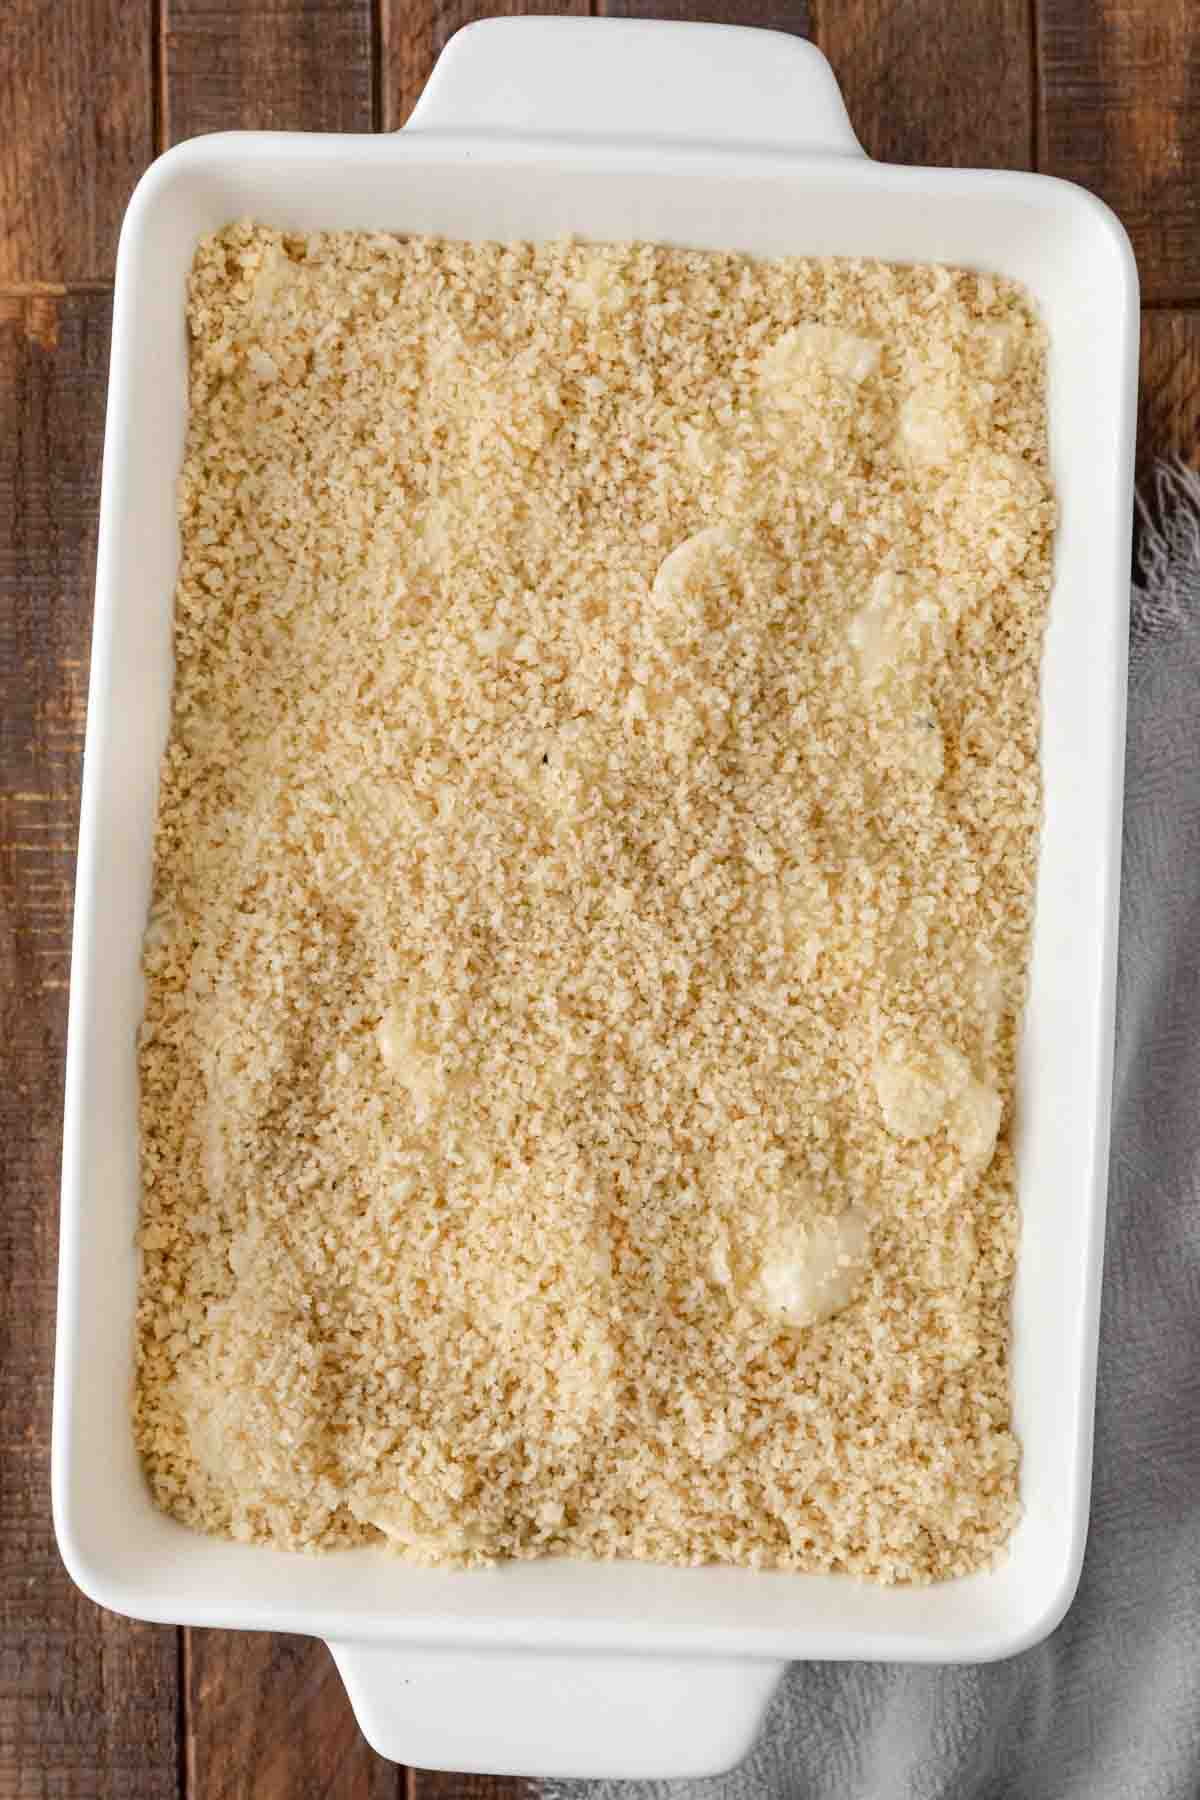 cauliflower florets covered with the cheese roux and bread crumbs in a baking dish